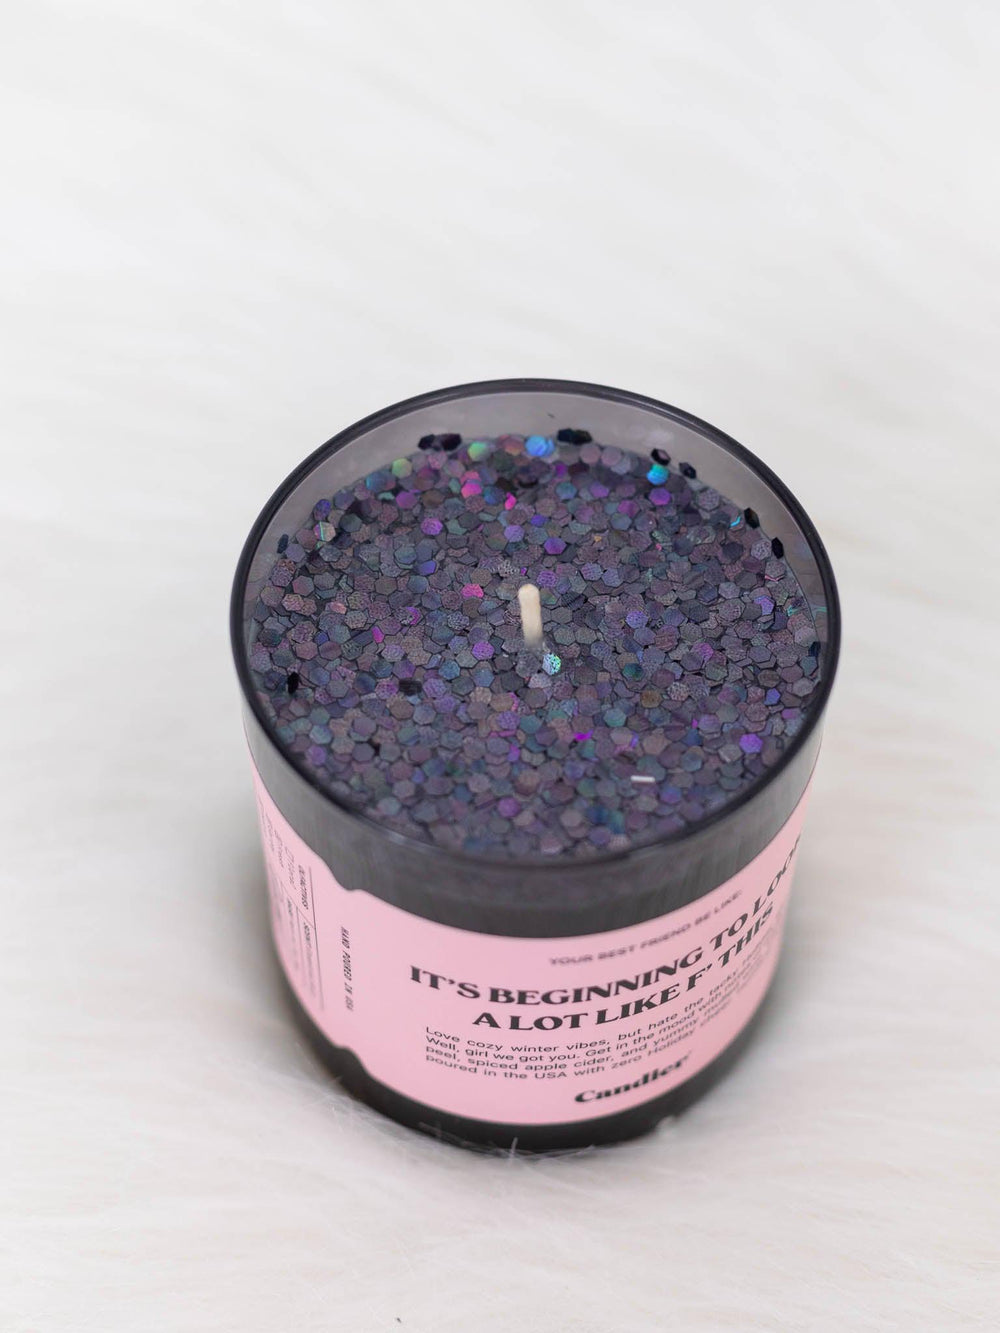 Candier-Candier F This Candle - Leela and Lavender